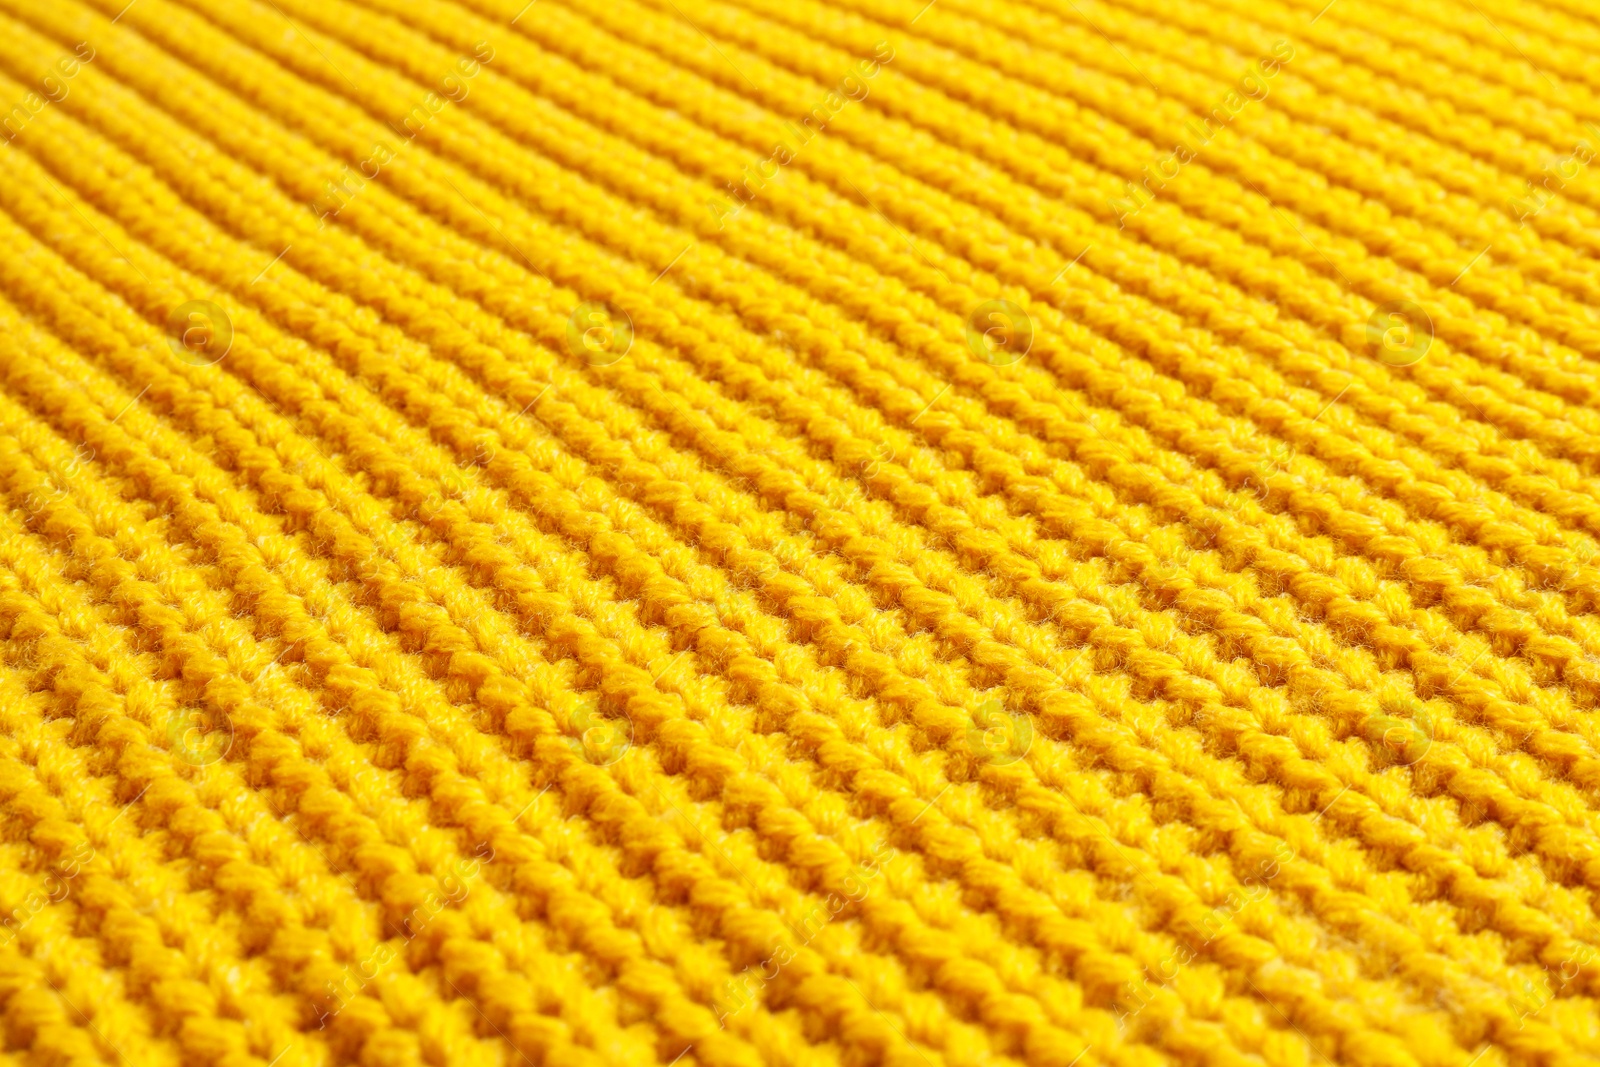 Photo of Yellow winter sweater as background, closeup view